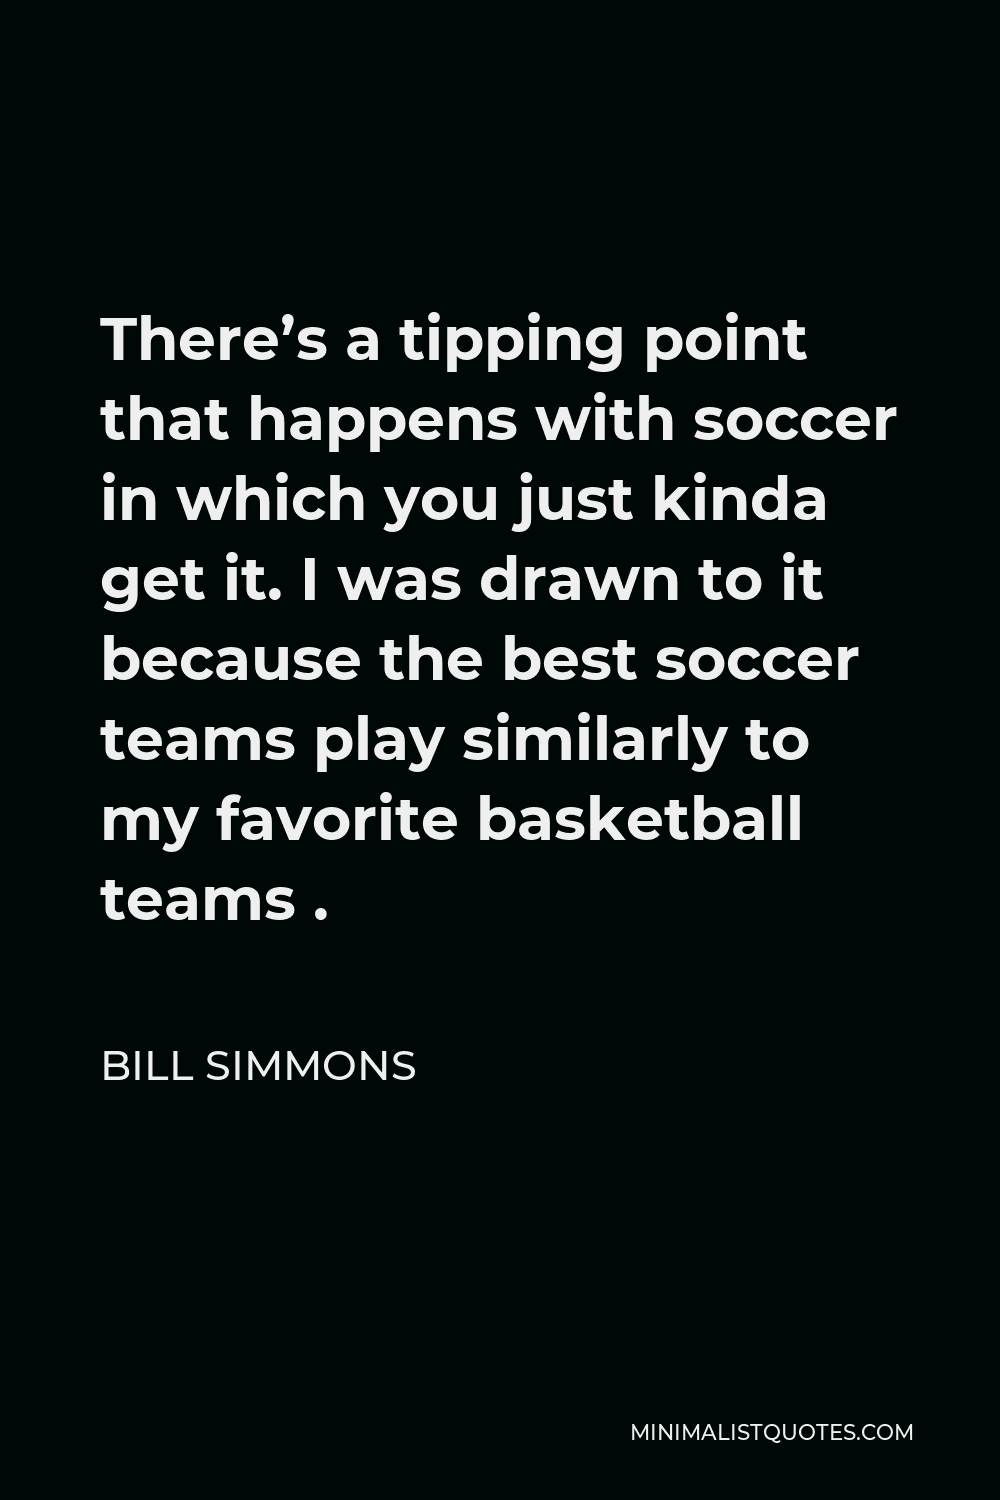 Bill Simmons Quote - There’s a tipping point that happens with soccer in which you just kinda get it. I was drawn to it because the best soccer teams play similarly to my favorite basketball teams .